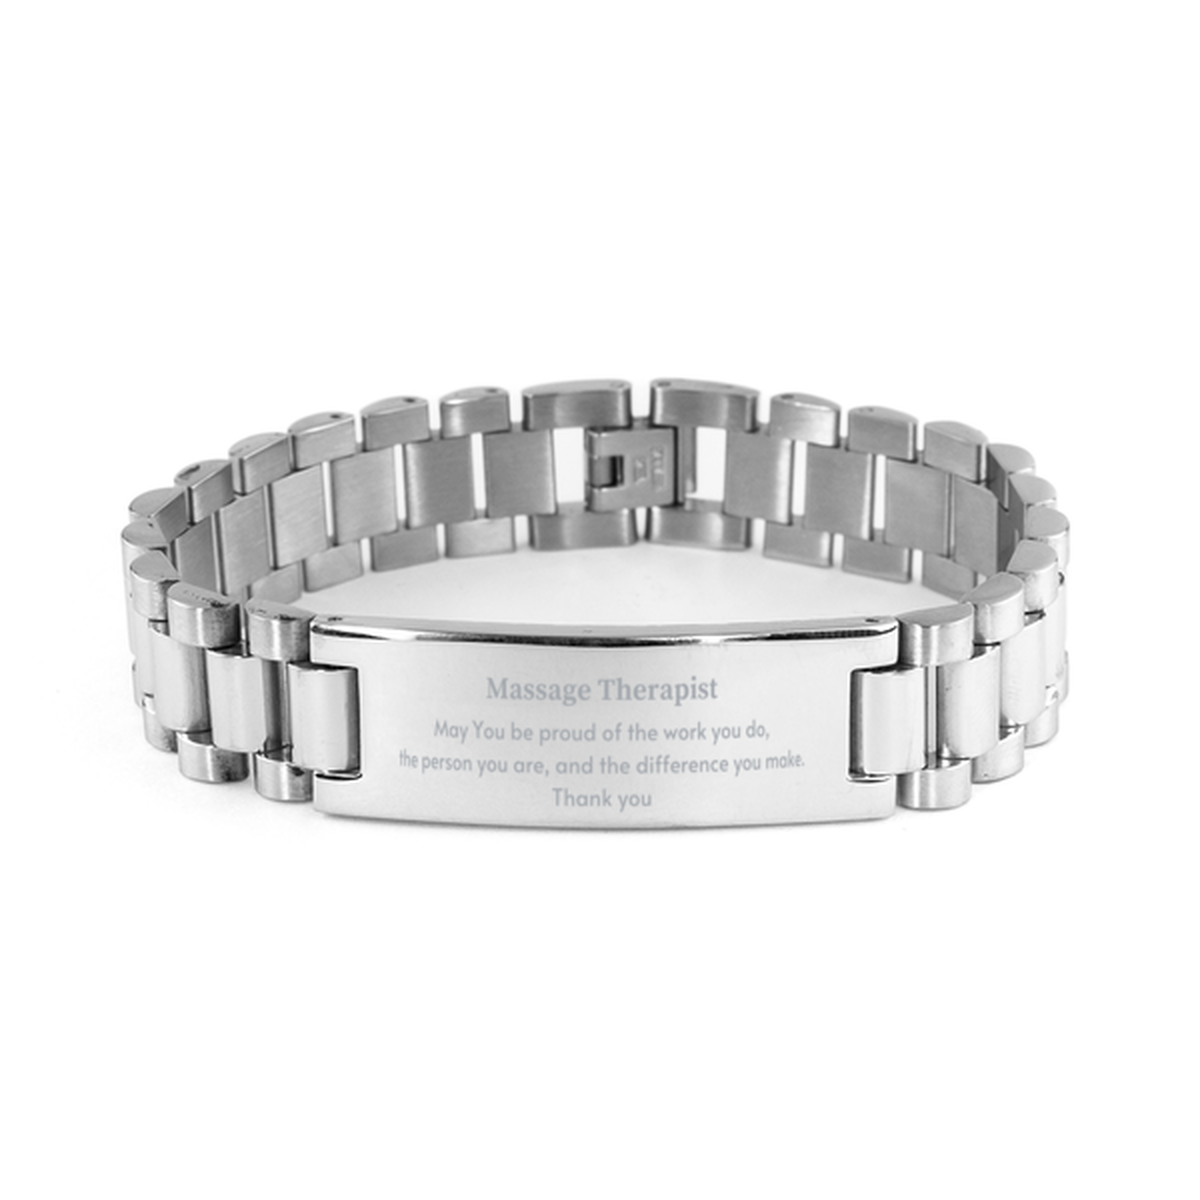 Heartwarming Ladder Stainless Steel Bracelet Retirement Coworkers Gifts for Massage Therapist, Massage Therapist May You be proud of the work you do, the person you are Gifts for Boss Men Women Friends